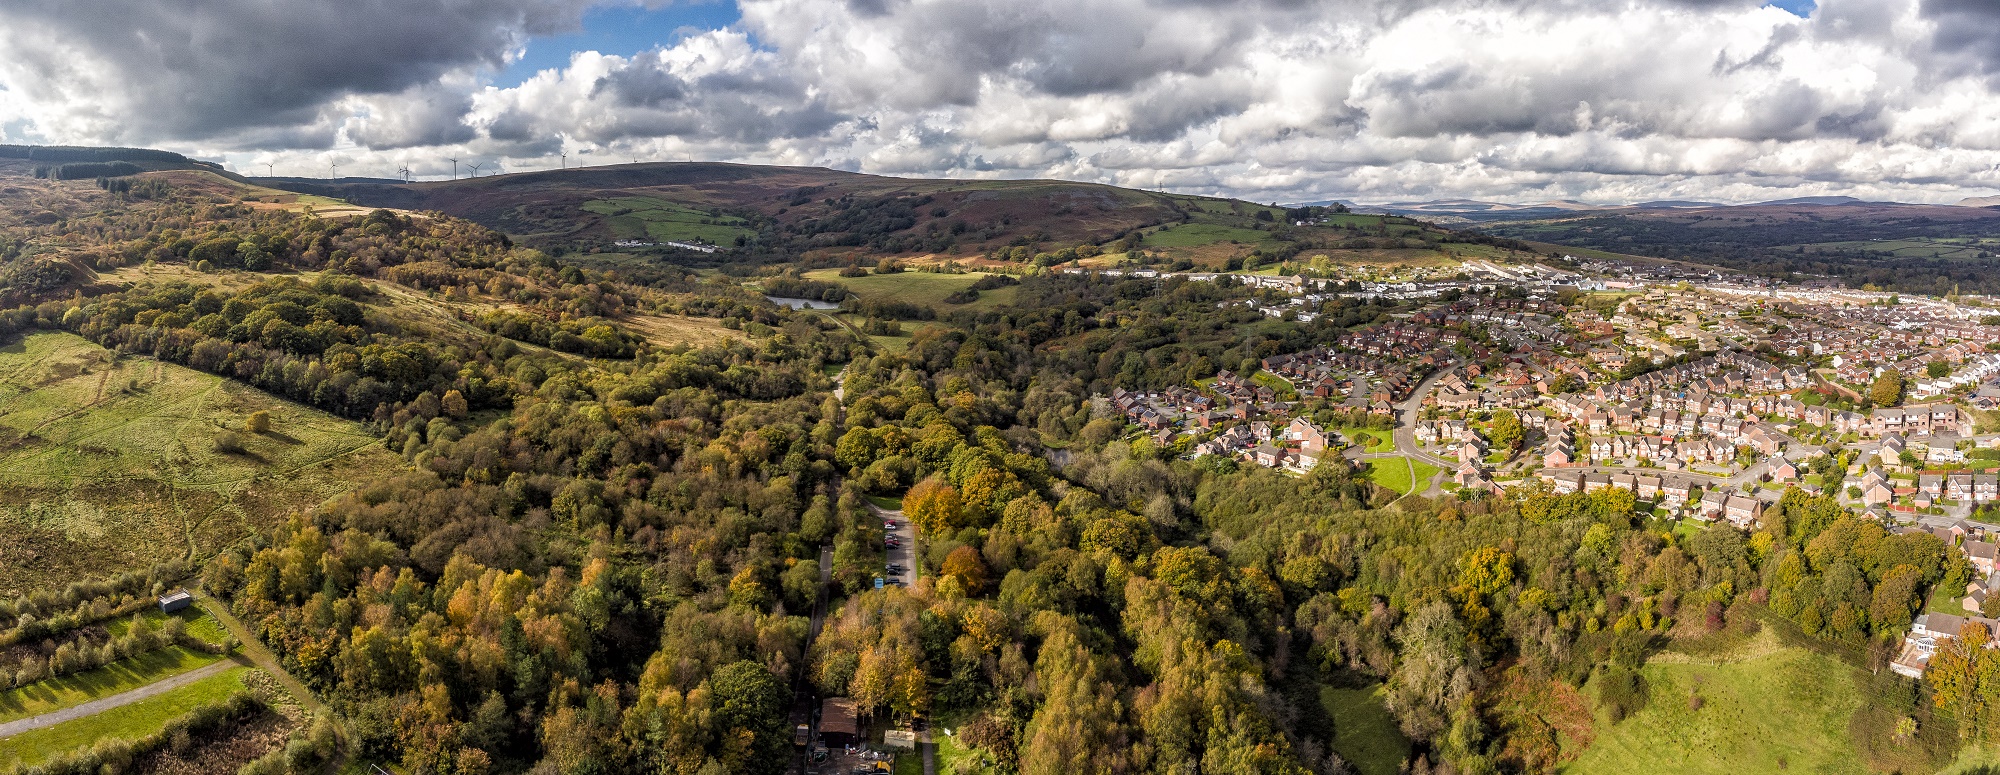 Dare-Valley-Country-Park---Aerial-2